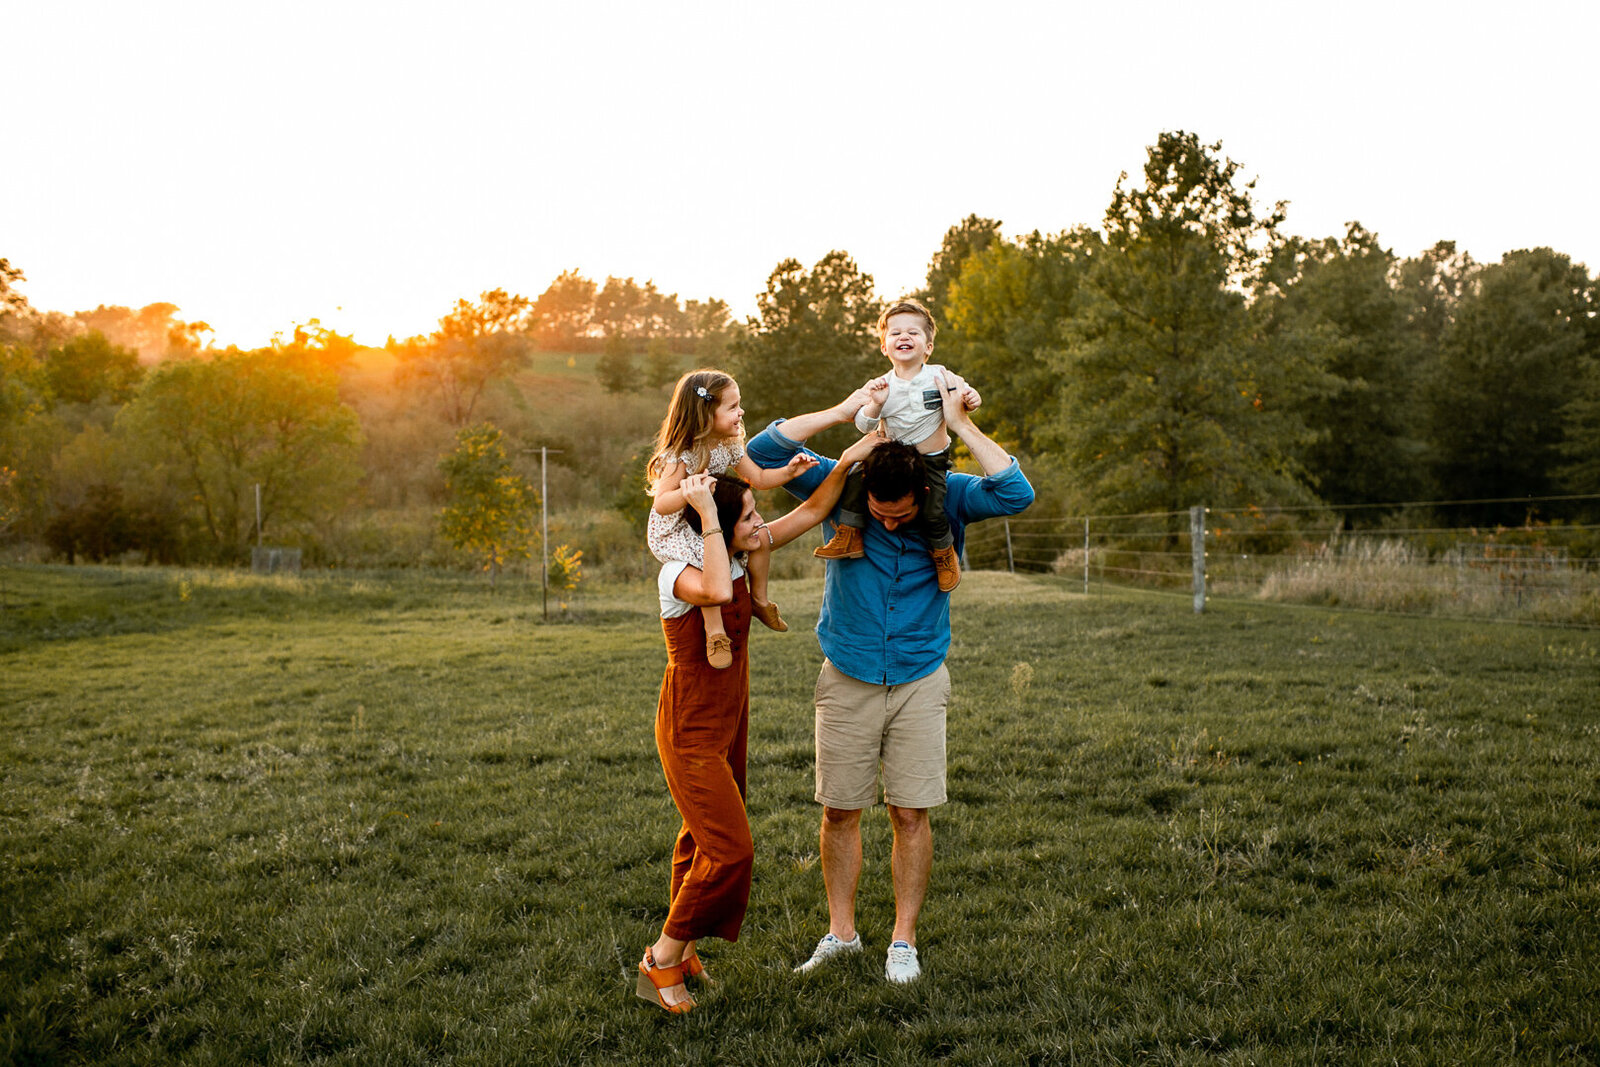 Des Moines family laughing and playing in open field